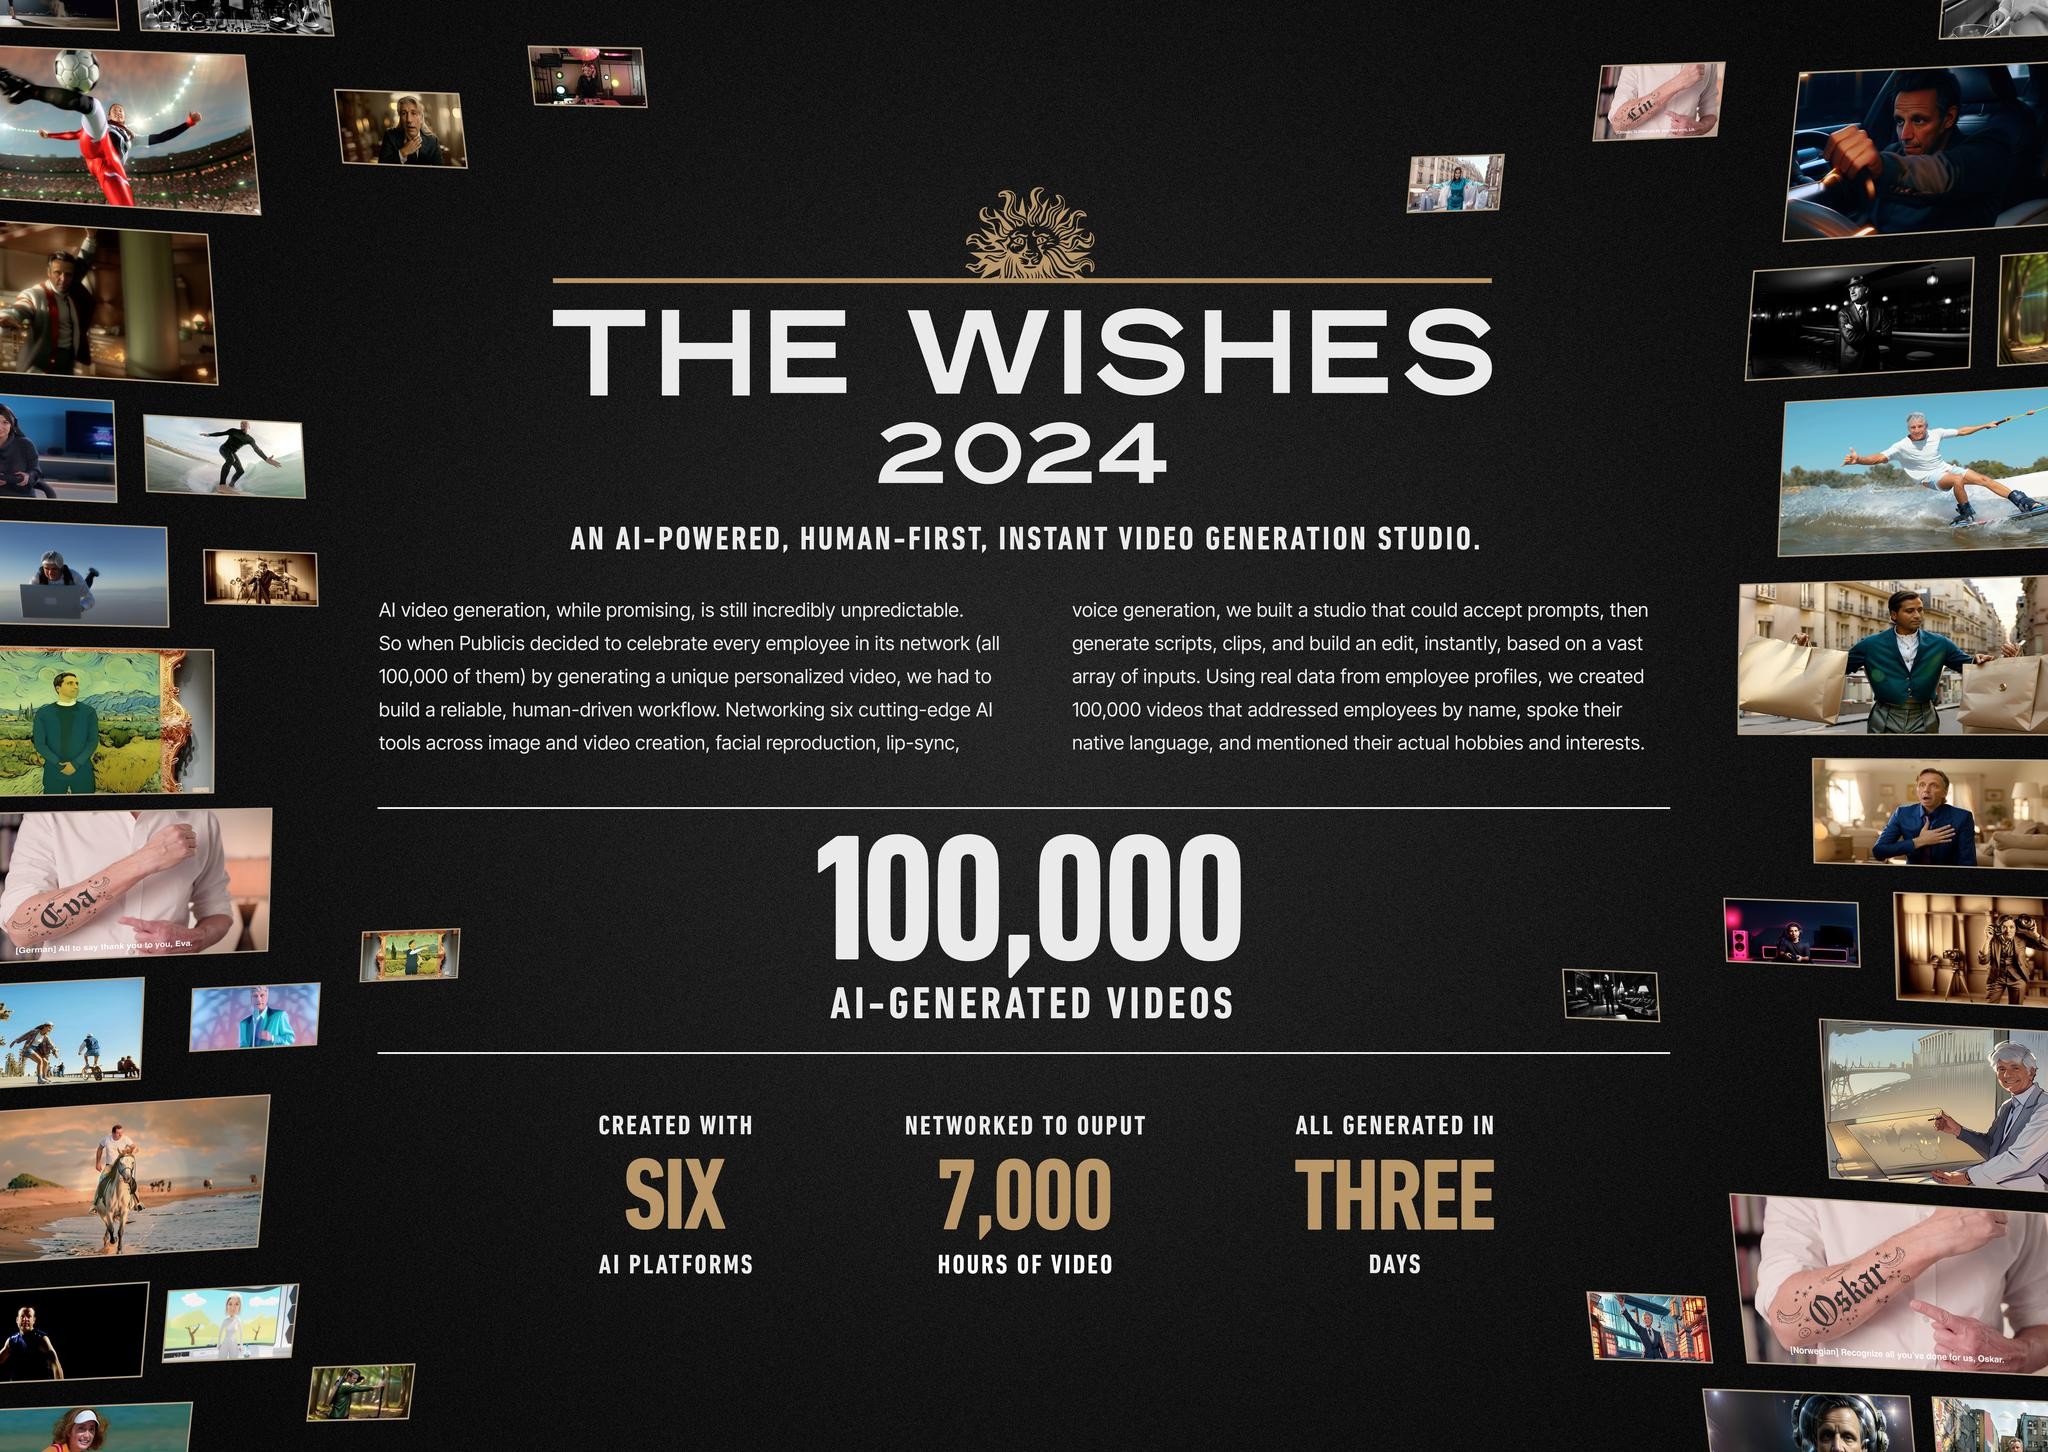 The Wishes 2024